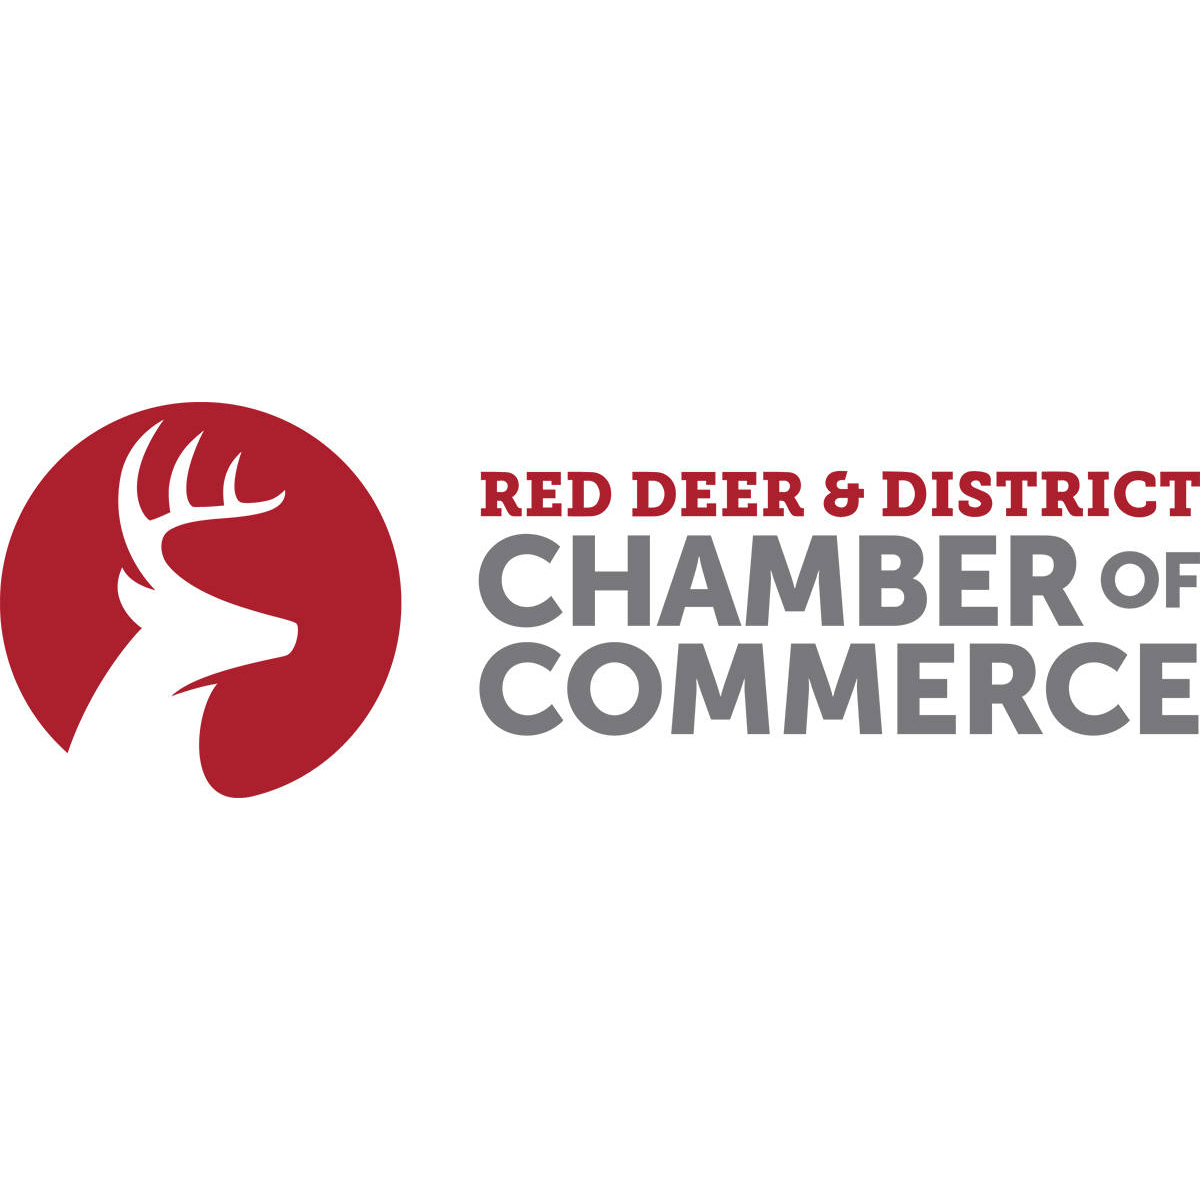 Red Deer & District Chamber of Commerce